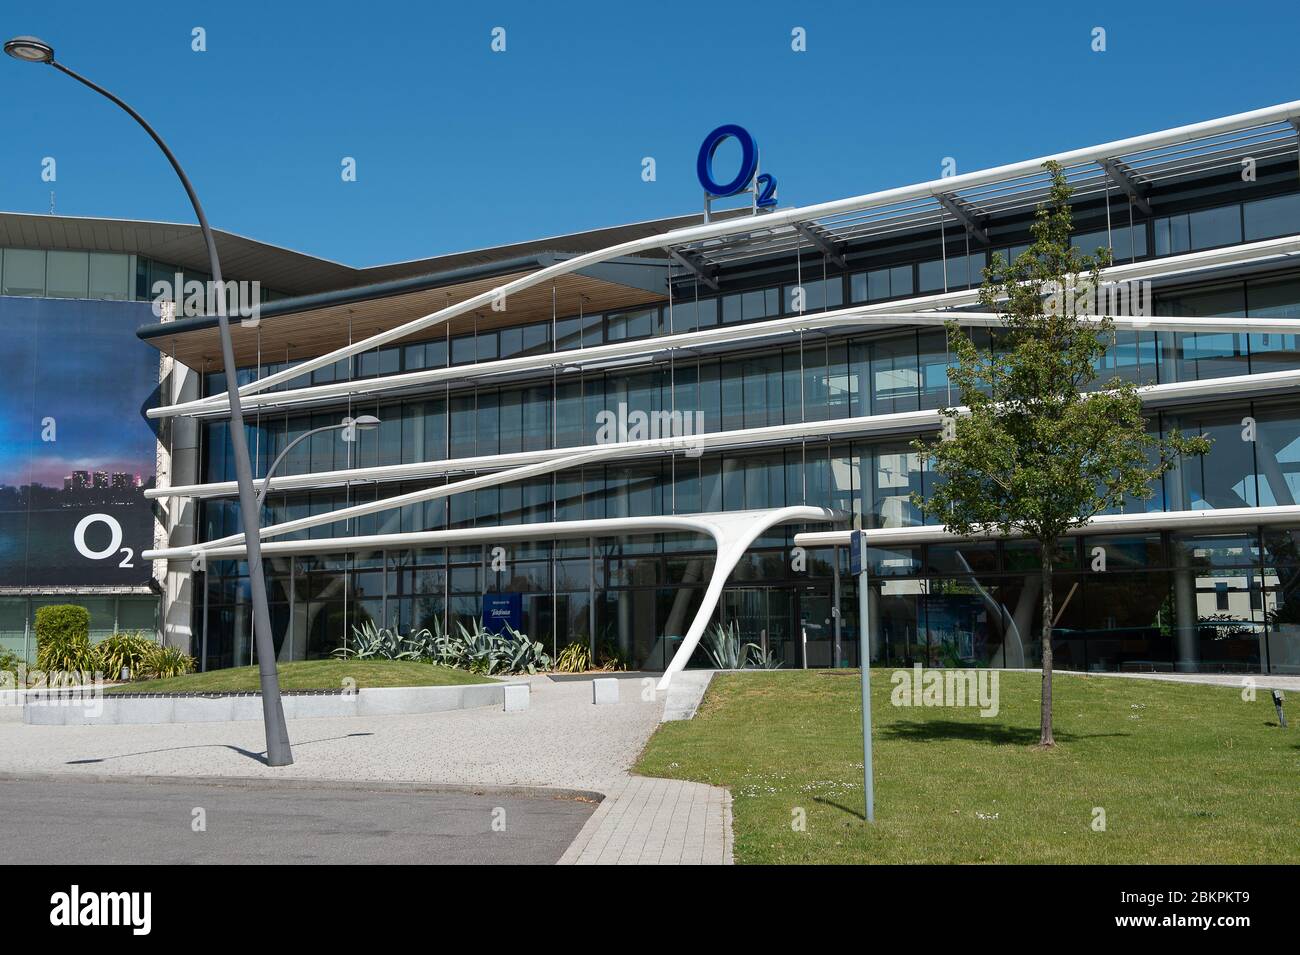 Slough, Berkshire, UK. 5th May, 2020. Mobile phone operator O2 and Virgin  Media are reported to be in talks for a possible merger. O2 is owned by  Spanish company Telefonica and Virgin